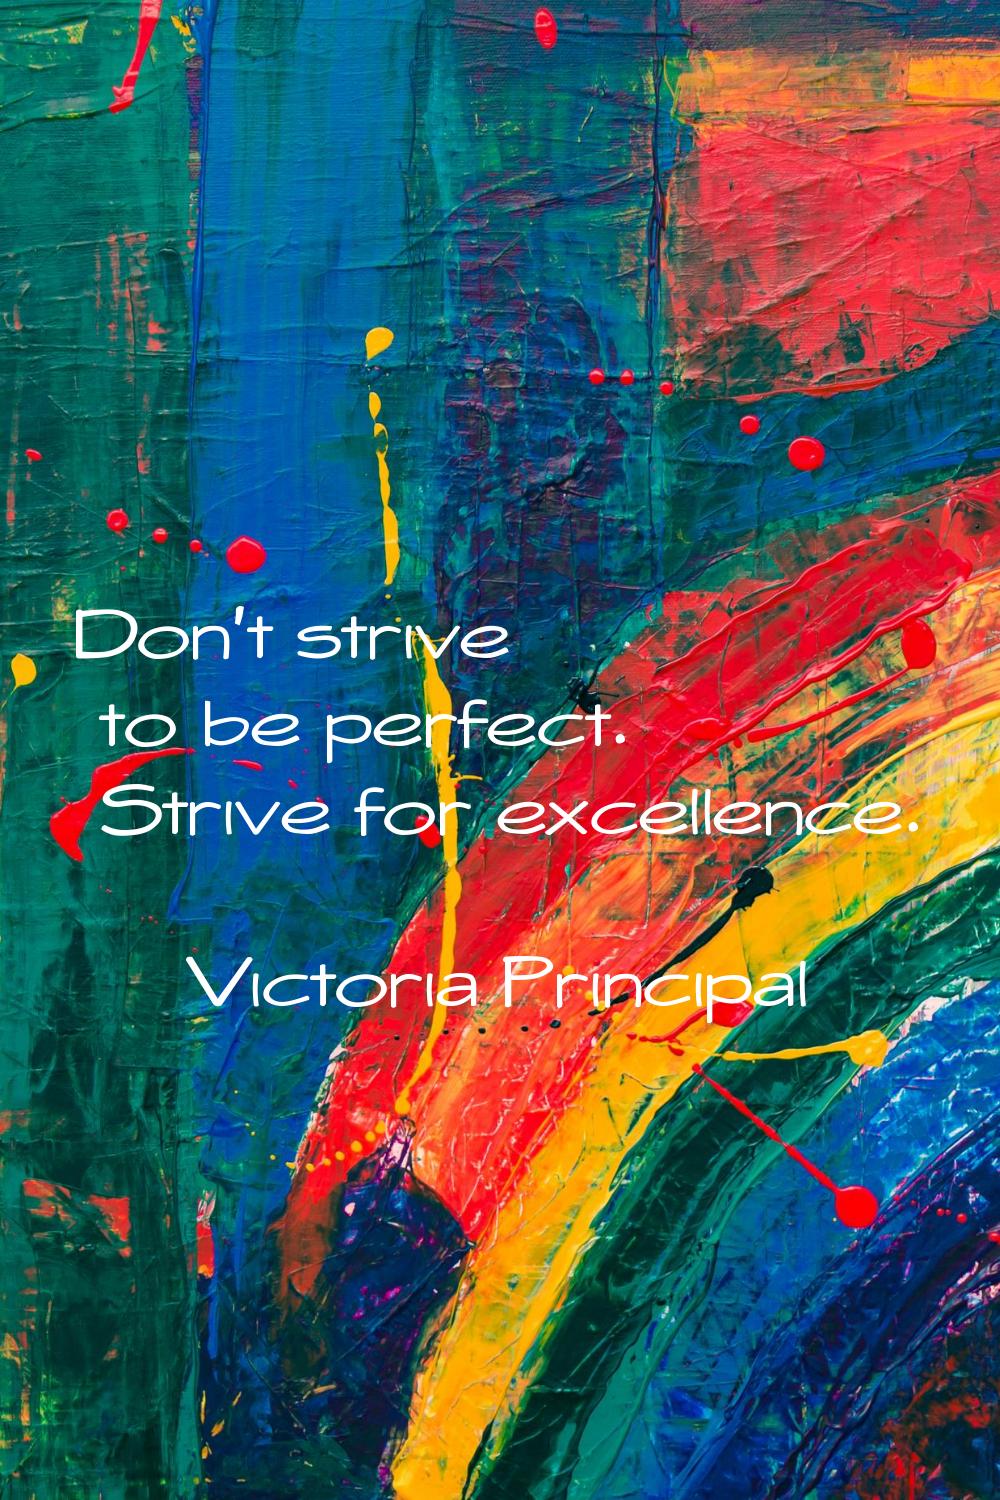 Don't strive to be perfect. Strive for excellence.